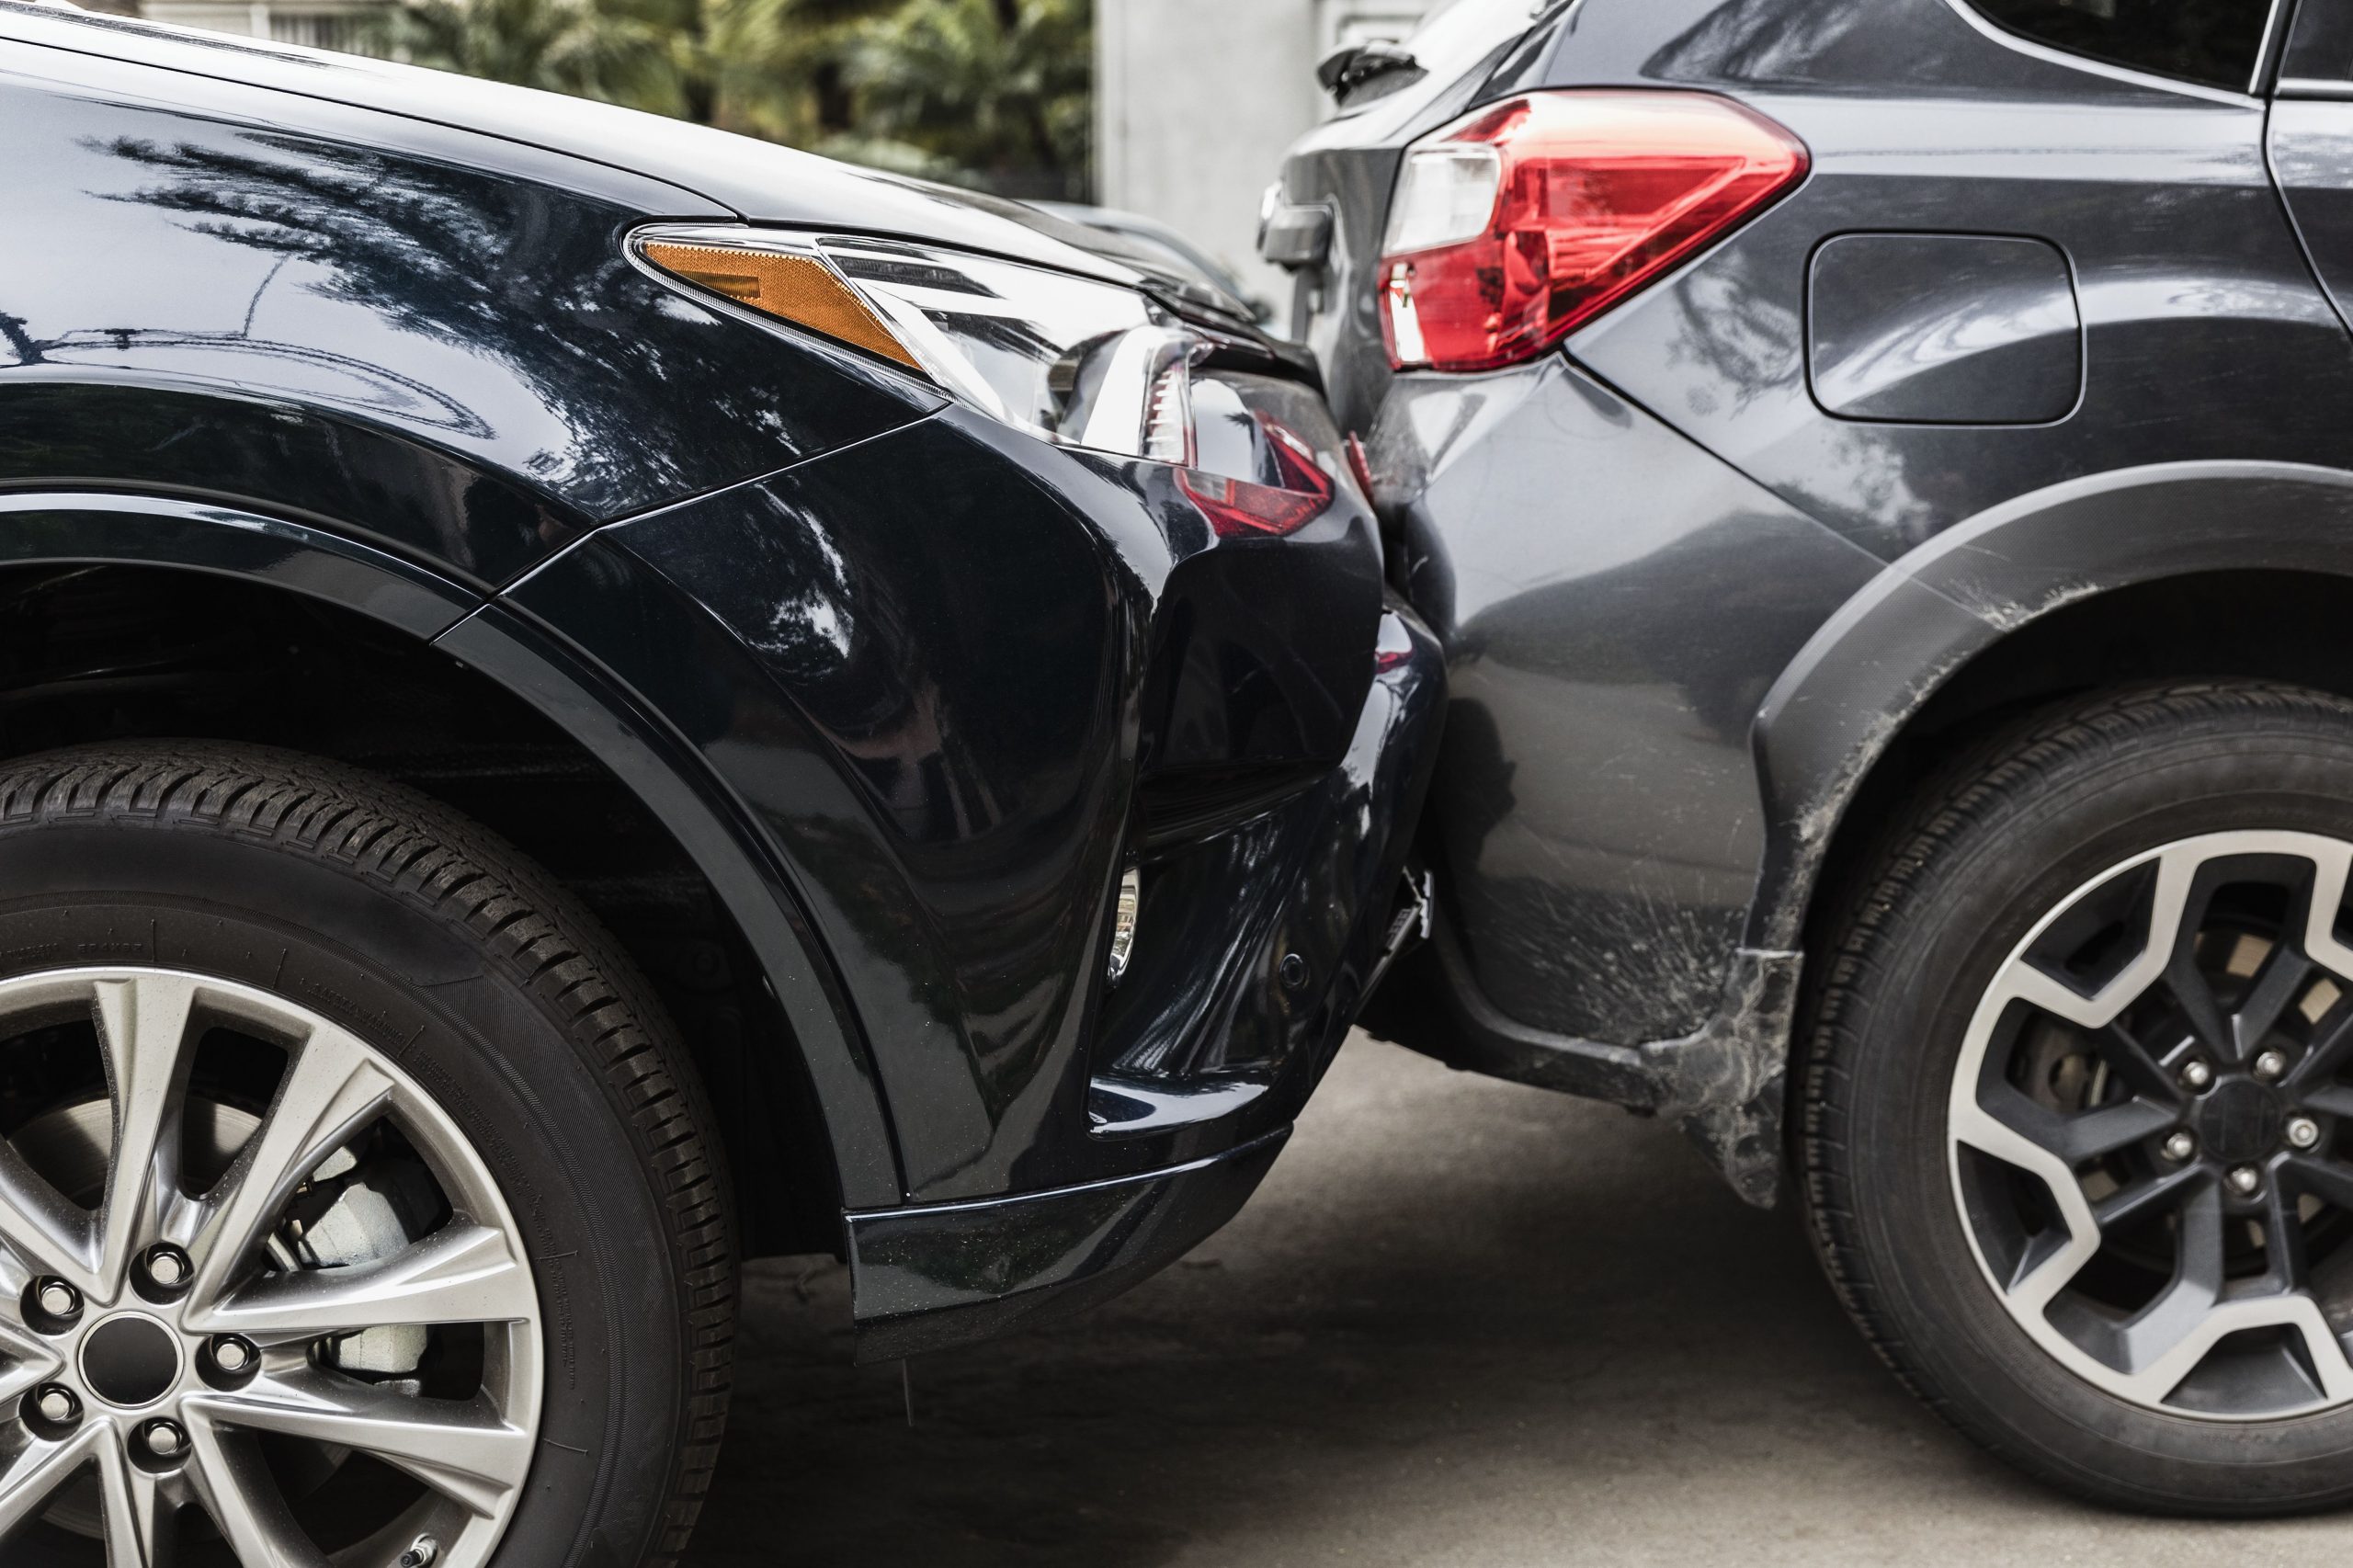 Collision Insurance Definition throughout size 5018 X 3345